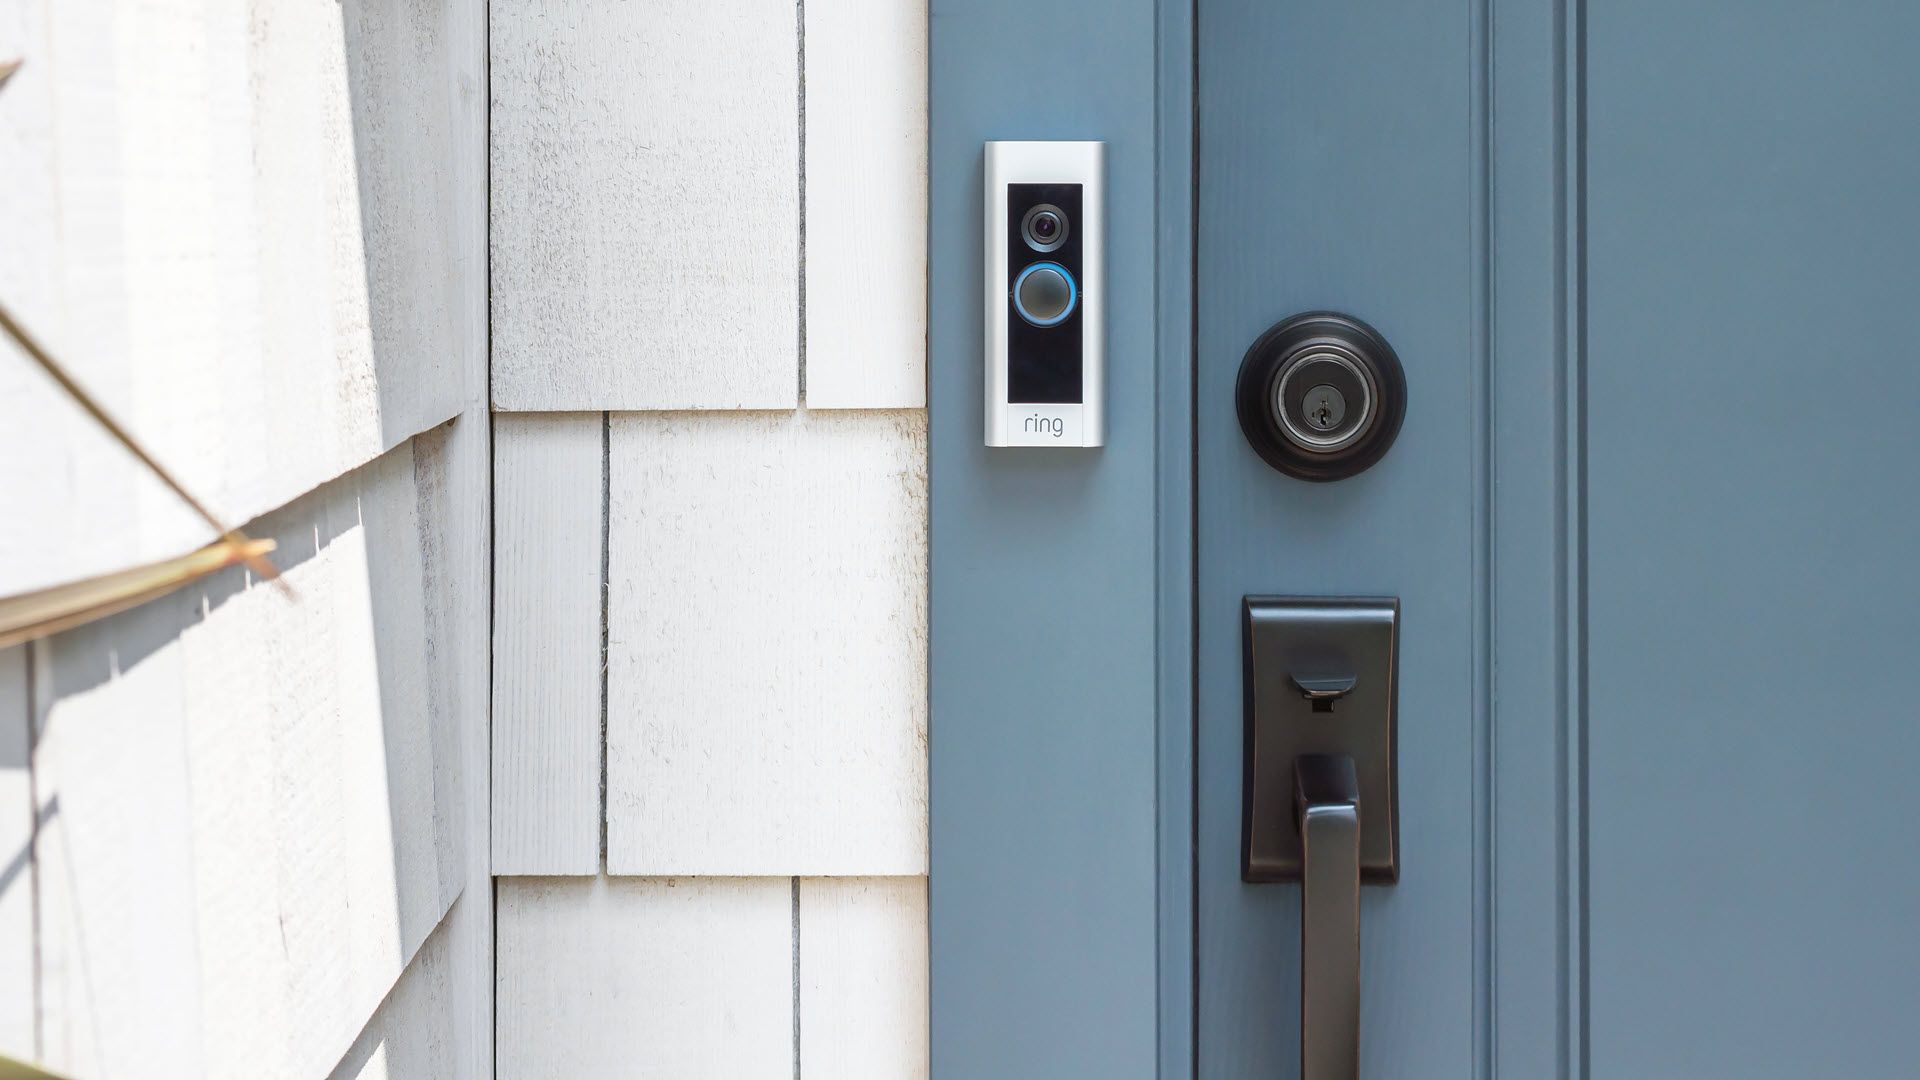 A Ring video doorbell mounted on a door frame.